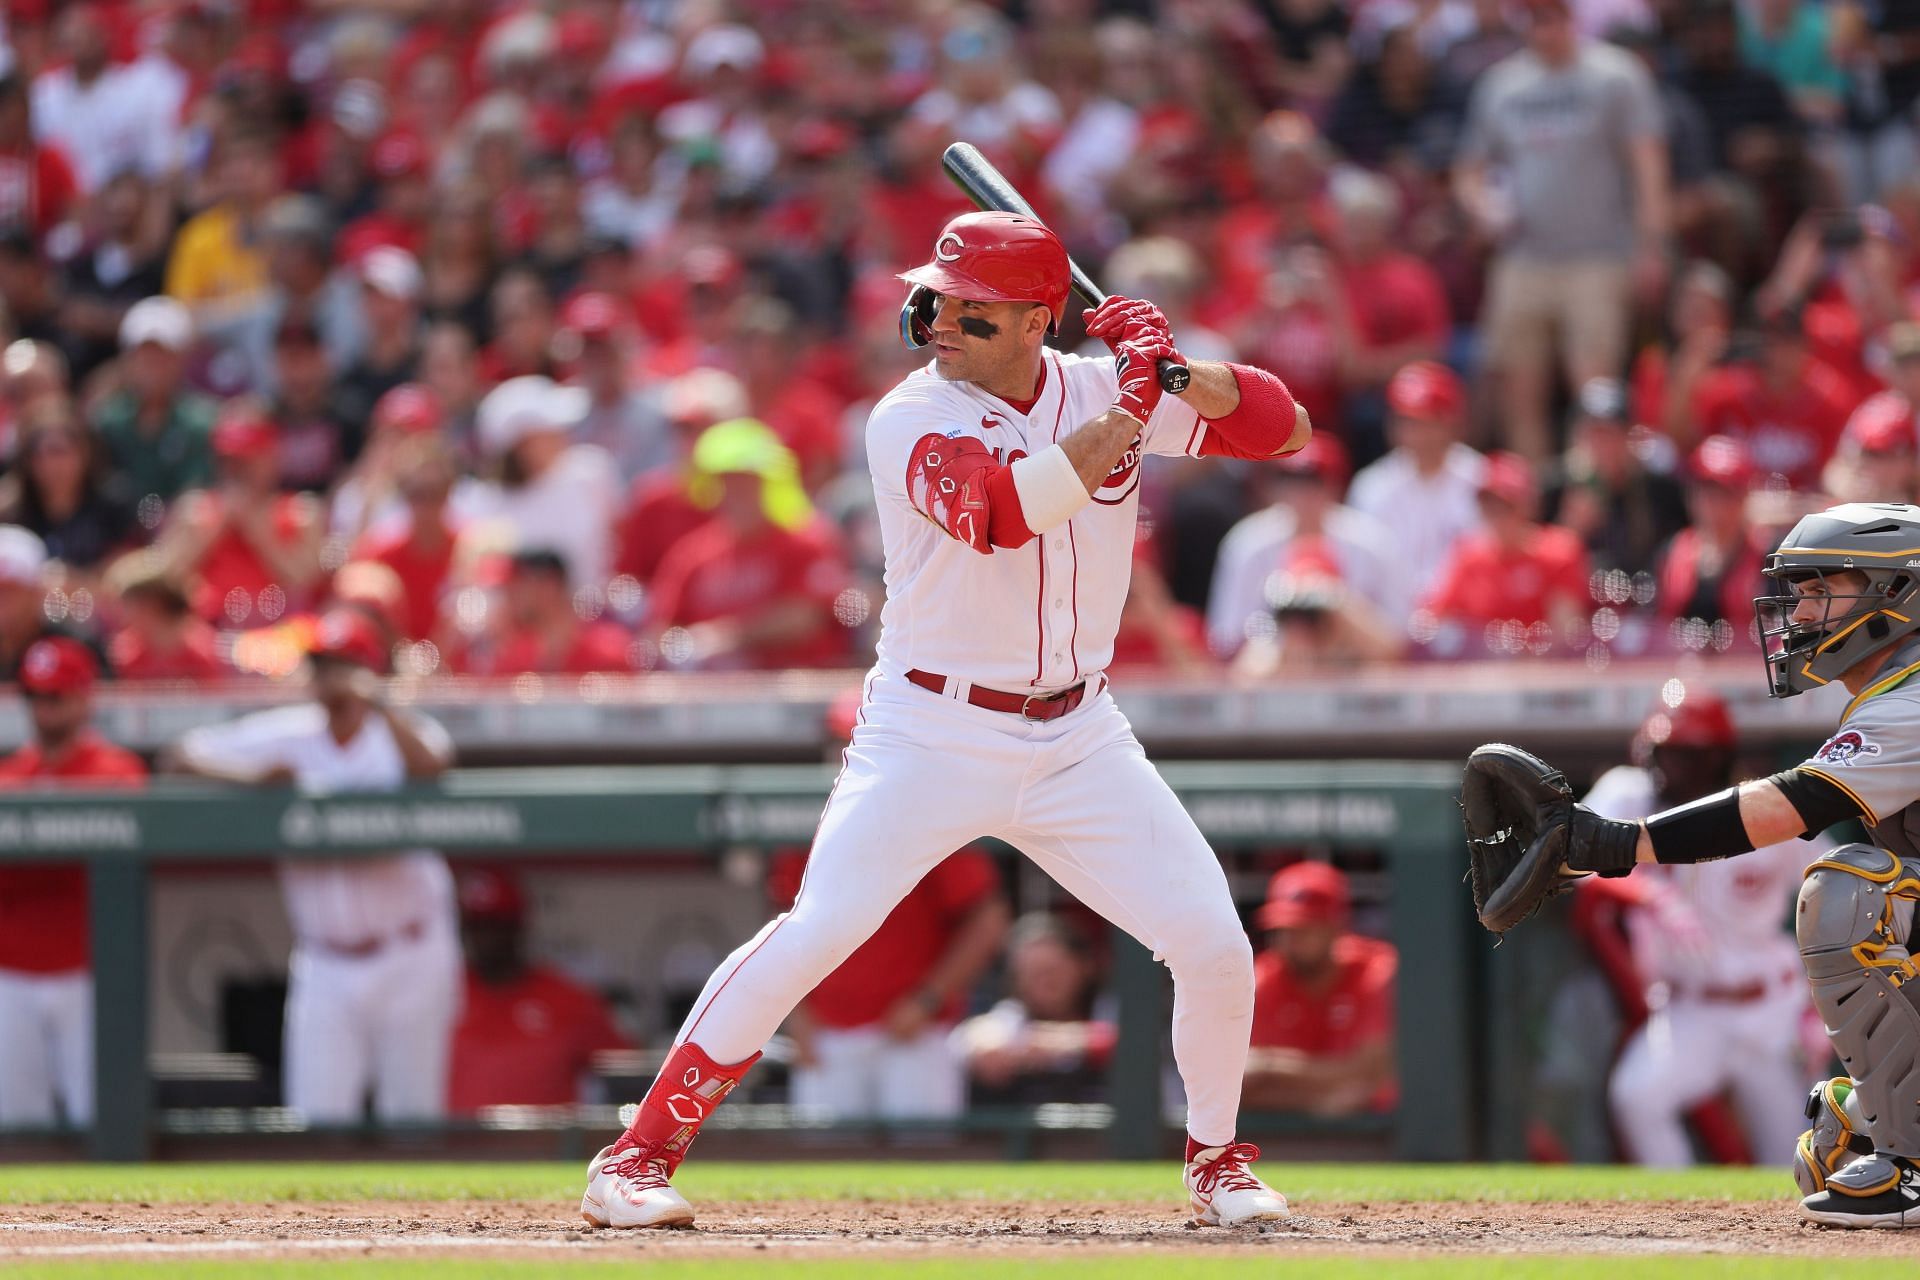 Joey Votto confident he will break out offensively after slow start